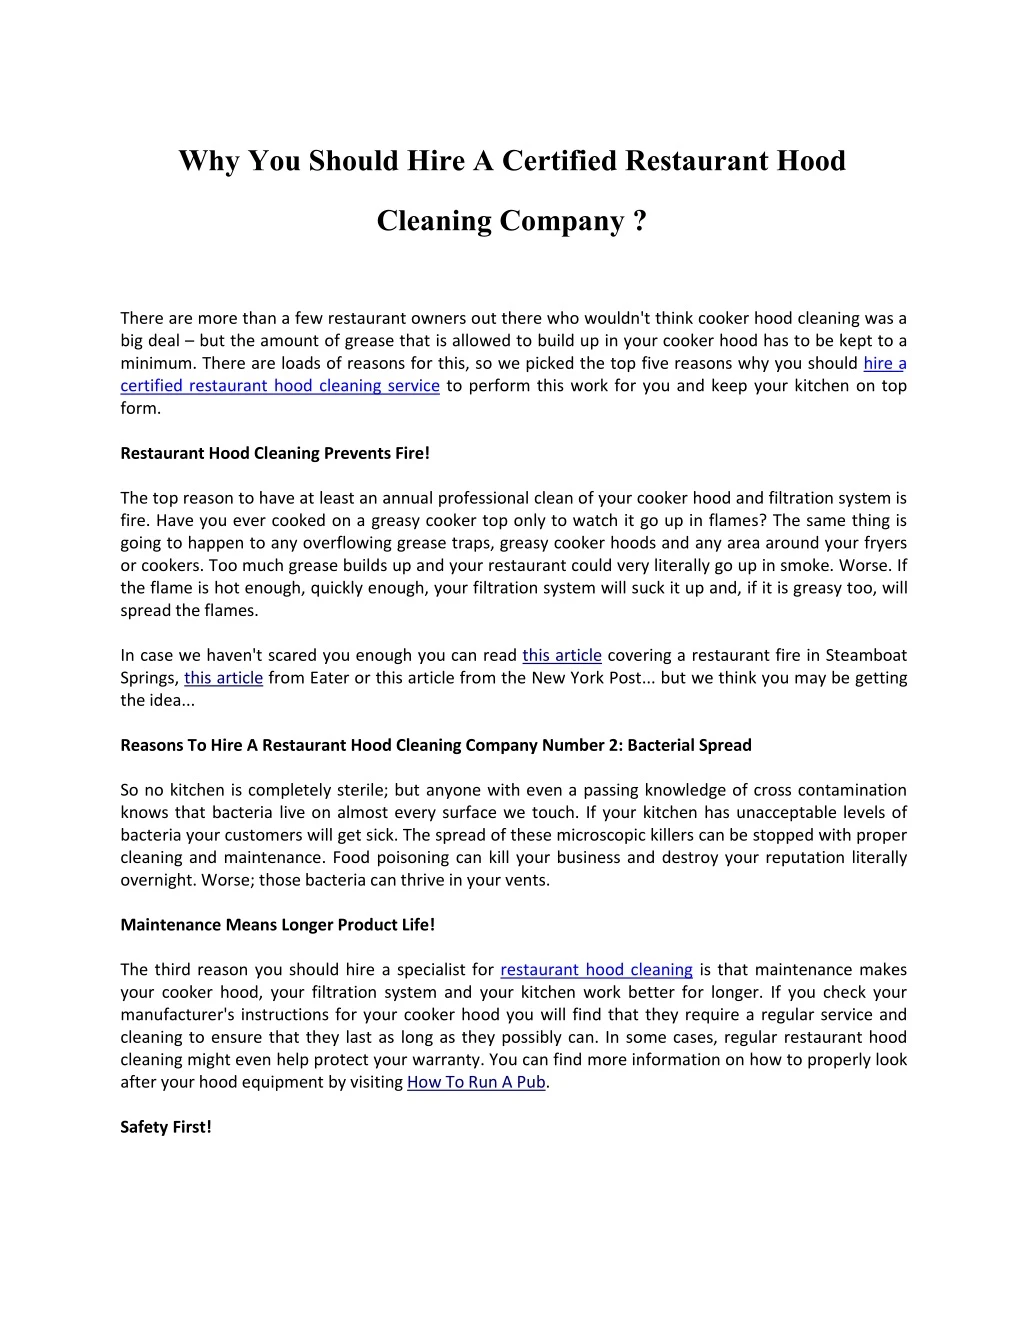 why you should hire a certified restaurant hood